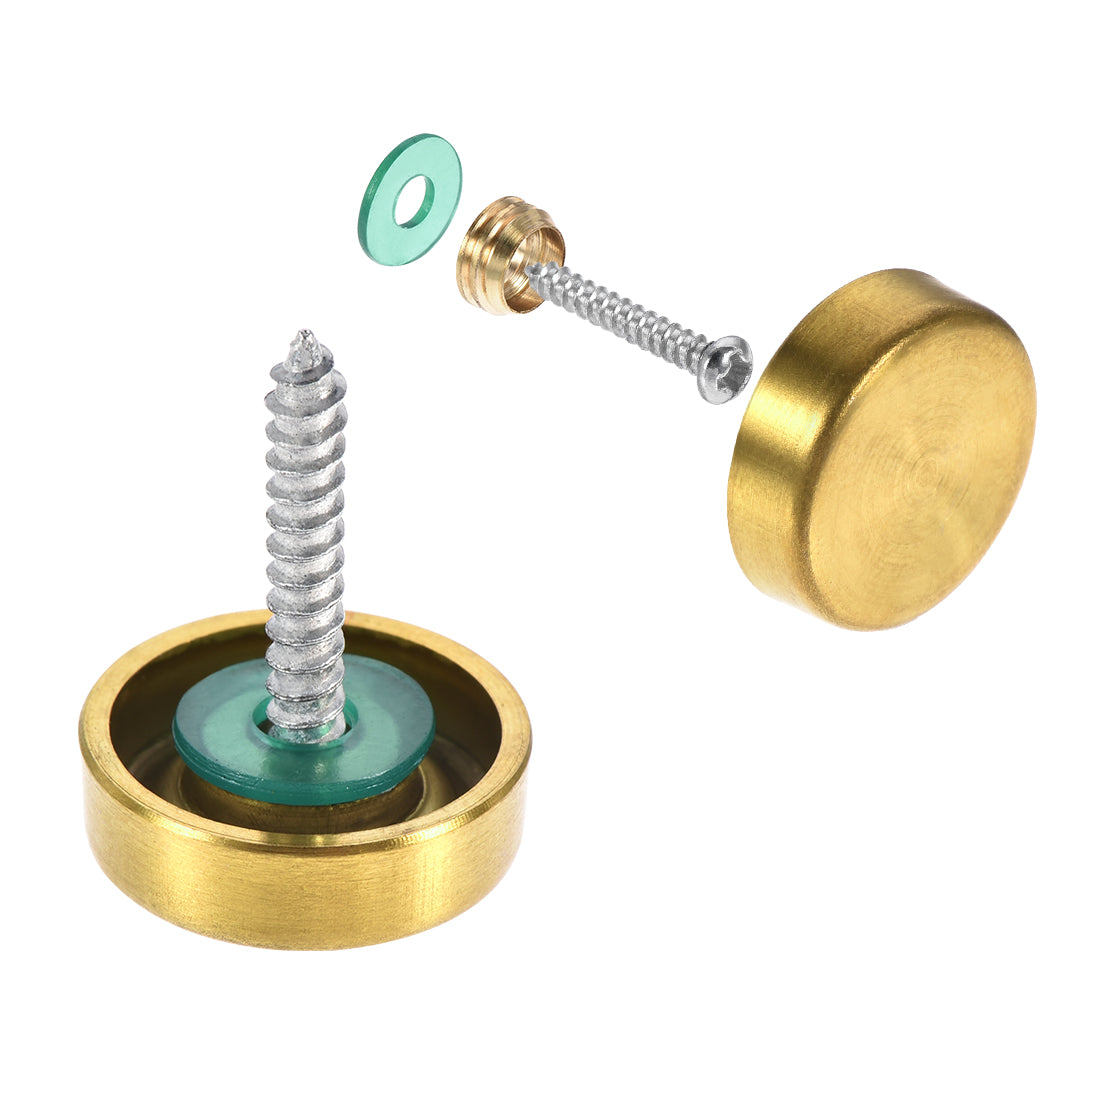 Uxcell Uxcell Mirror Screws, Decorative Cap Fasteners Cover Nails, Electroplated Wire Drawing, Golden 16mm/0.63" 8pcs